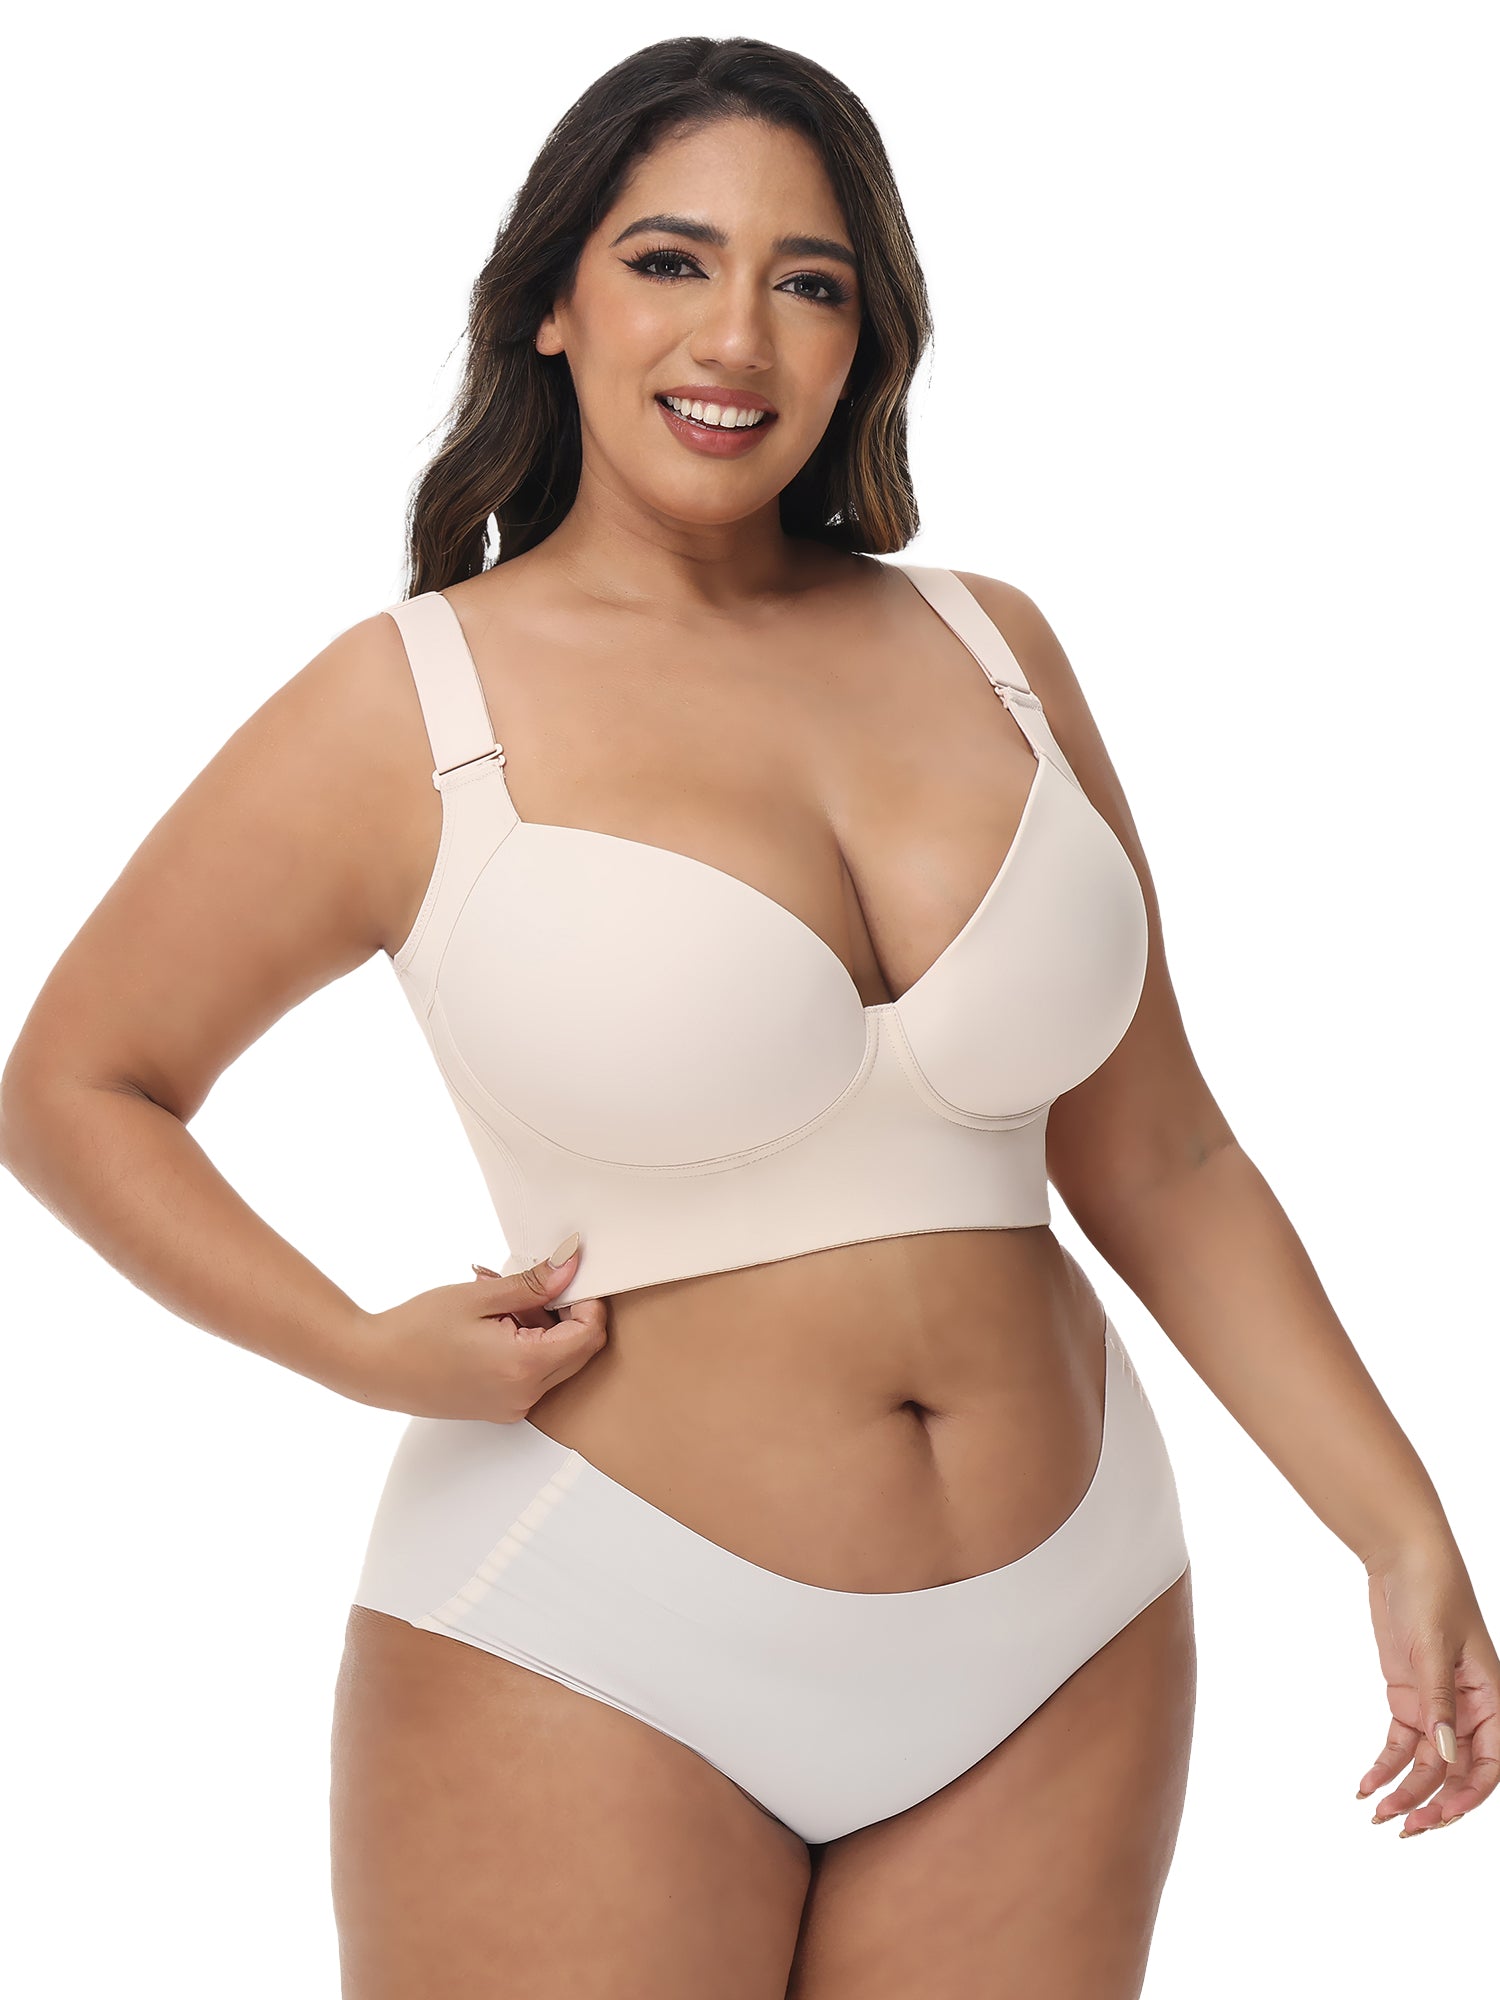 Buy Bralux Padded Rivera T-Back Bra with Regular Strap with Adjuster with  size B Cup;Fabric Strech Cotton Hosiery Color White (Size-34B) Online at  Low Prices in India 